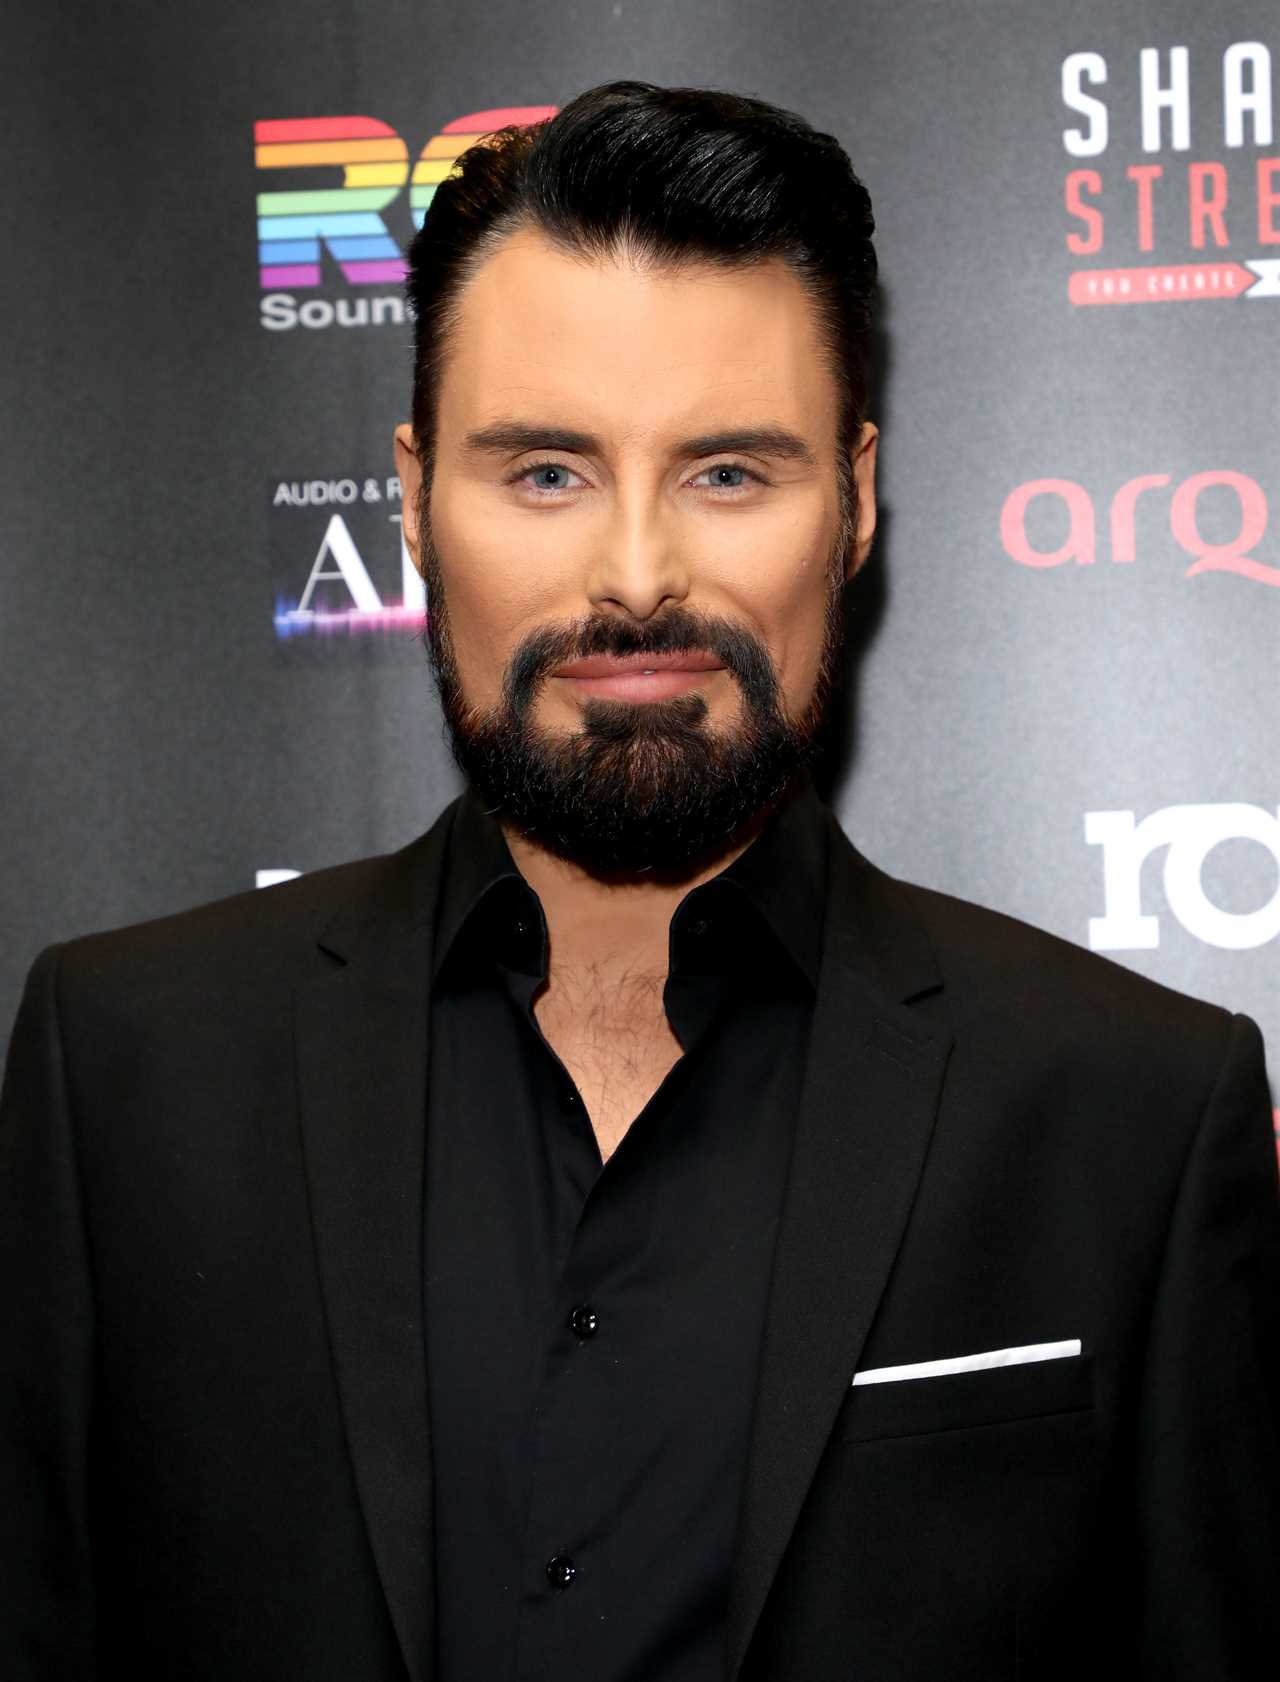 All the clues Rylan Clark has given that he’ll host Big Brother as he quits Strictly